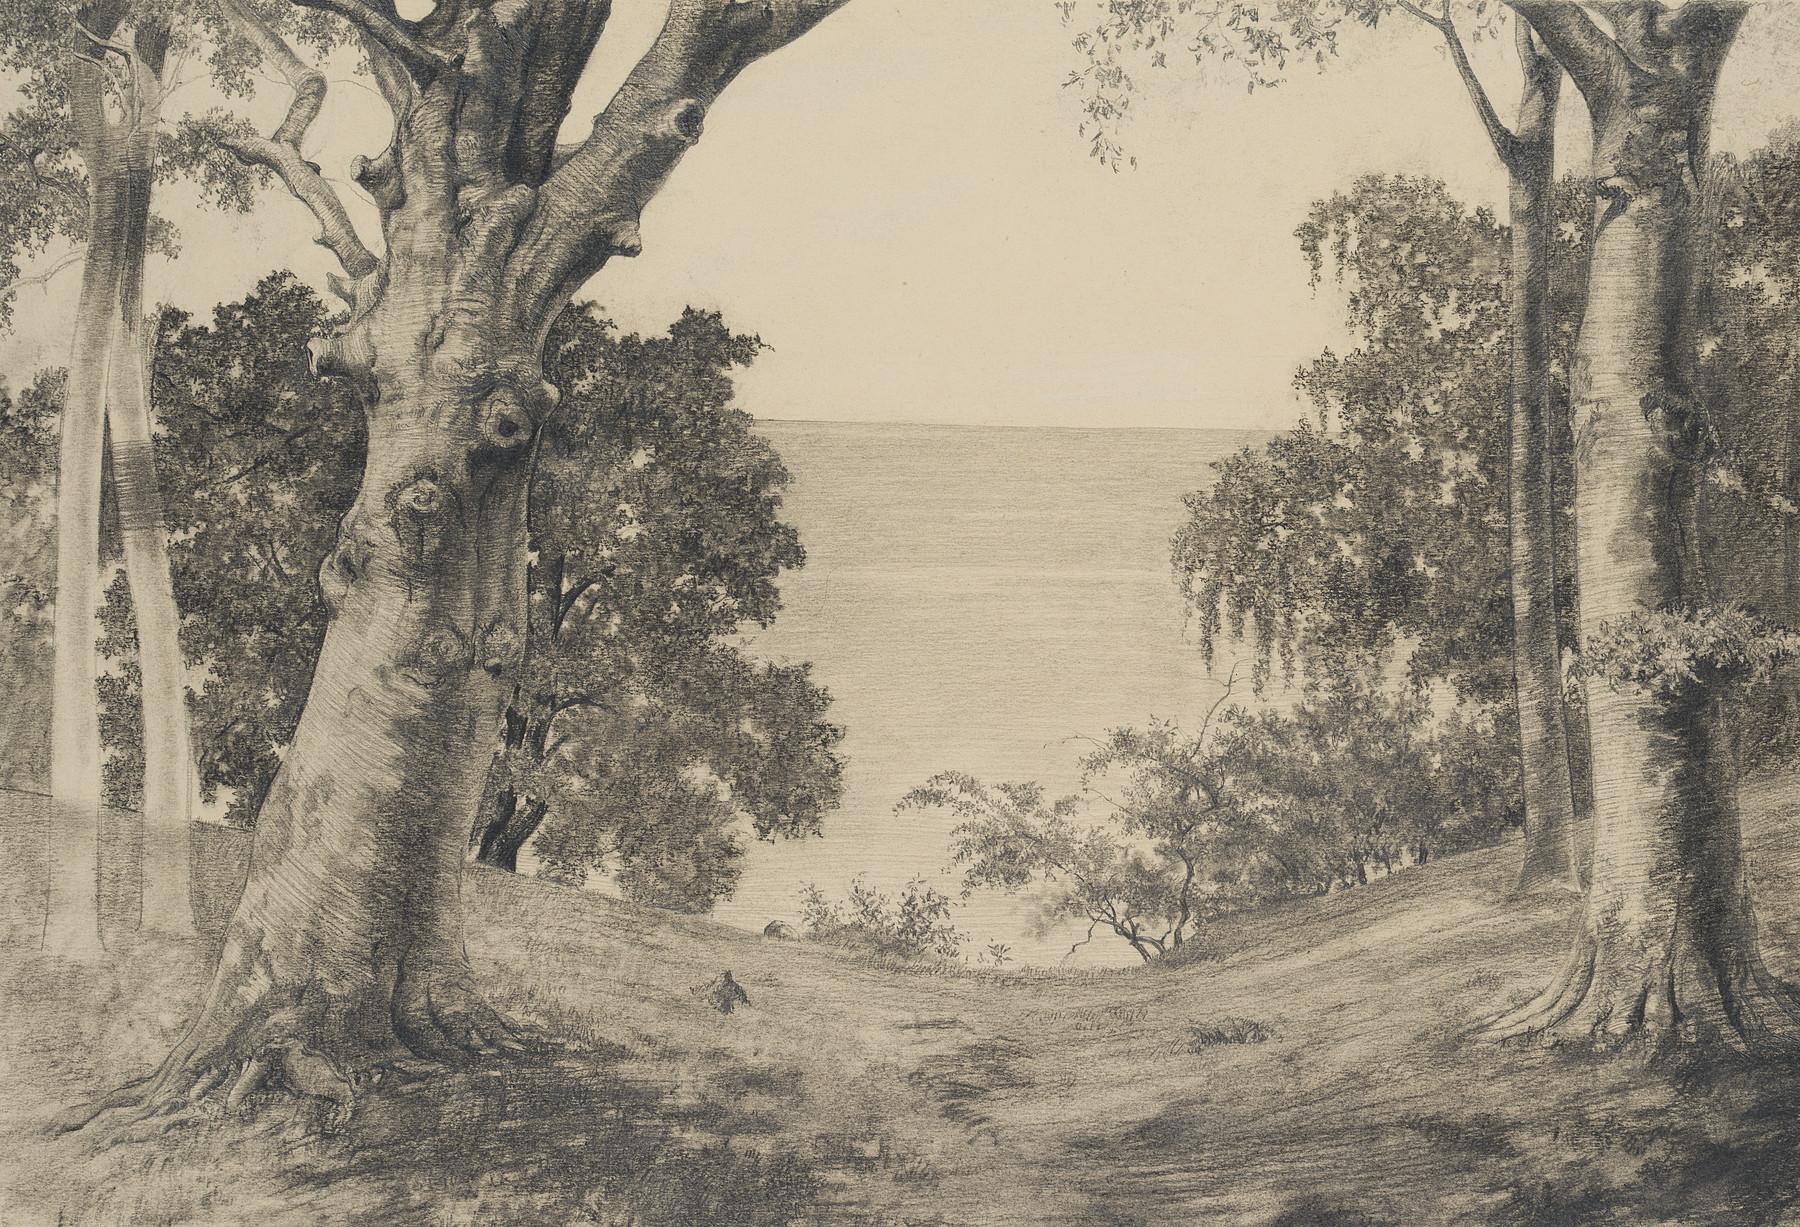 Carl August Walther Landscape Art - Landscape with trees by the sea